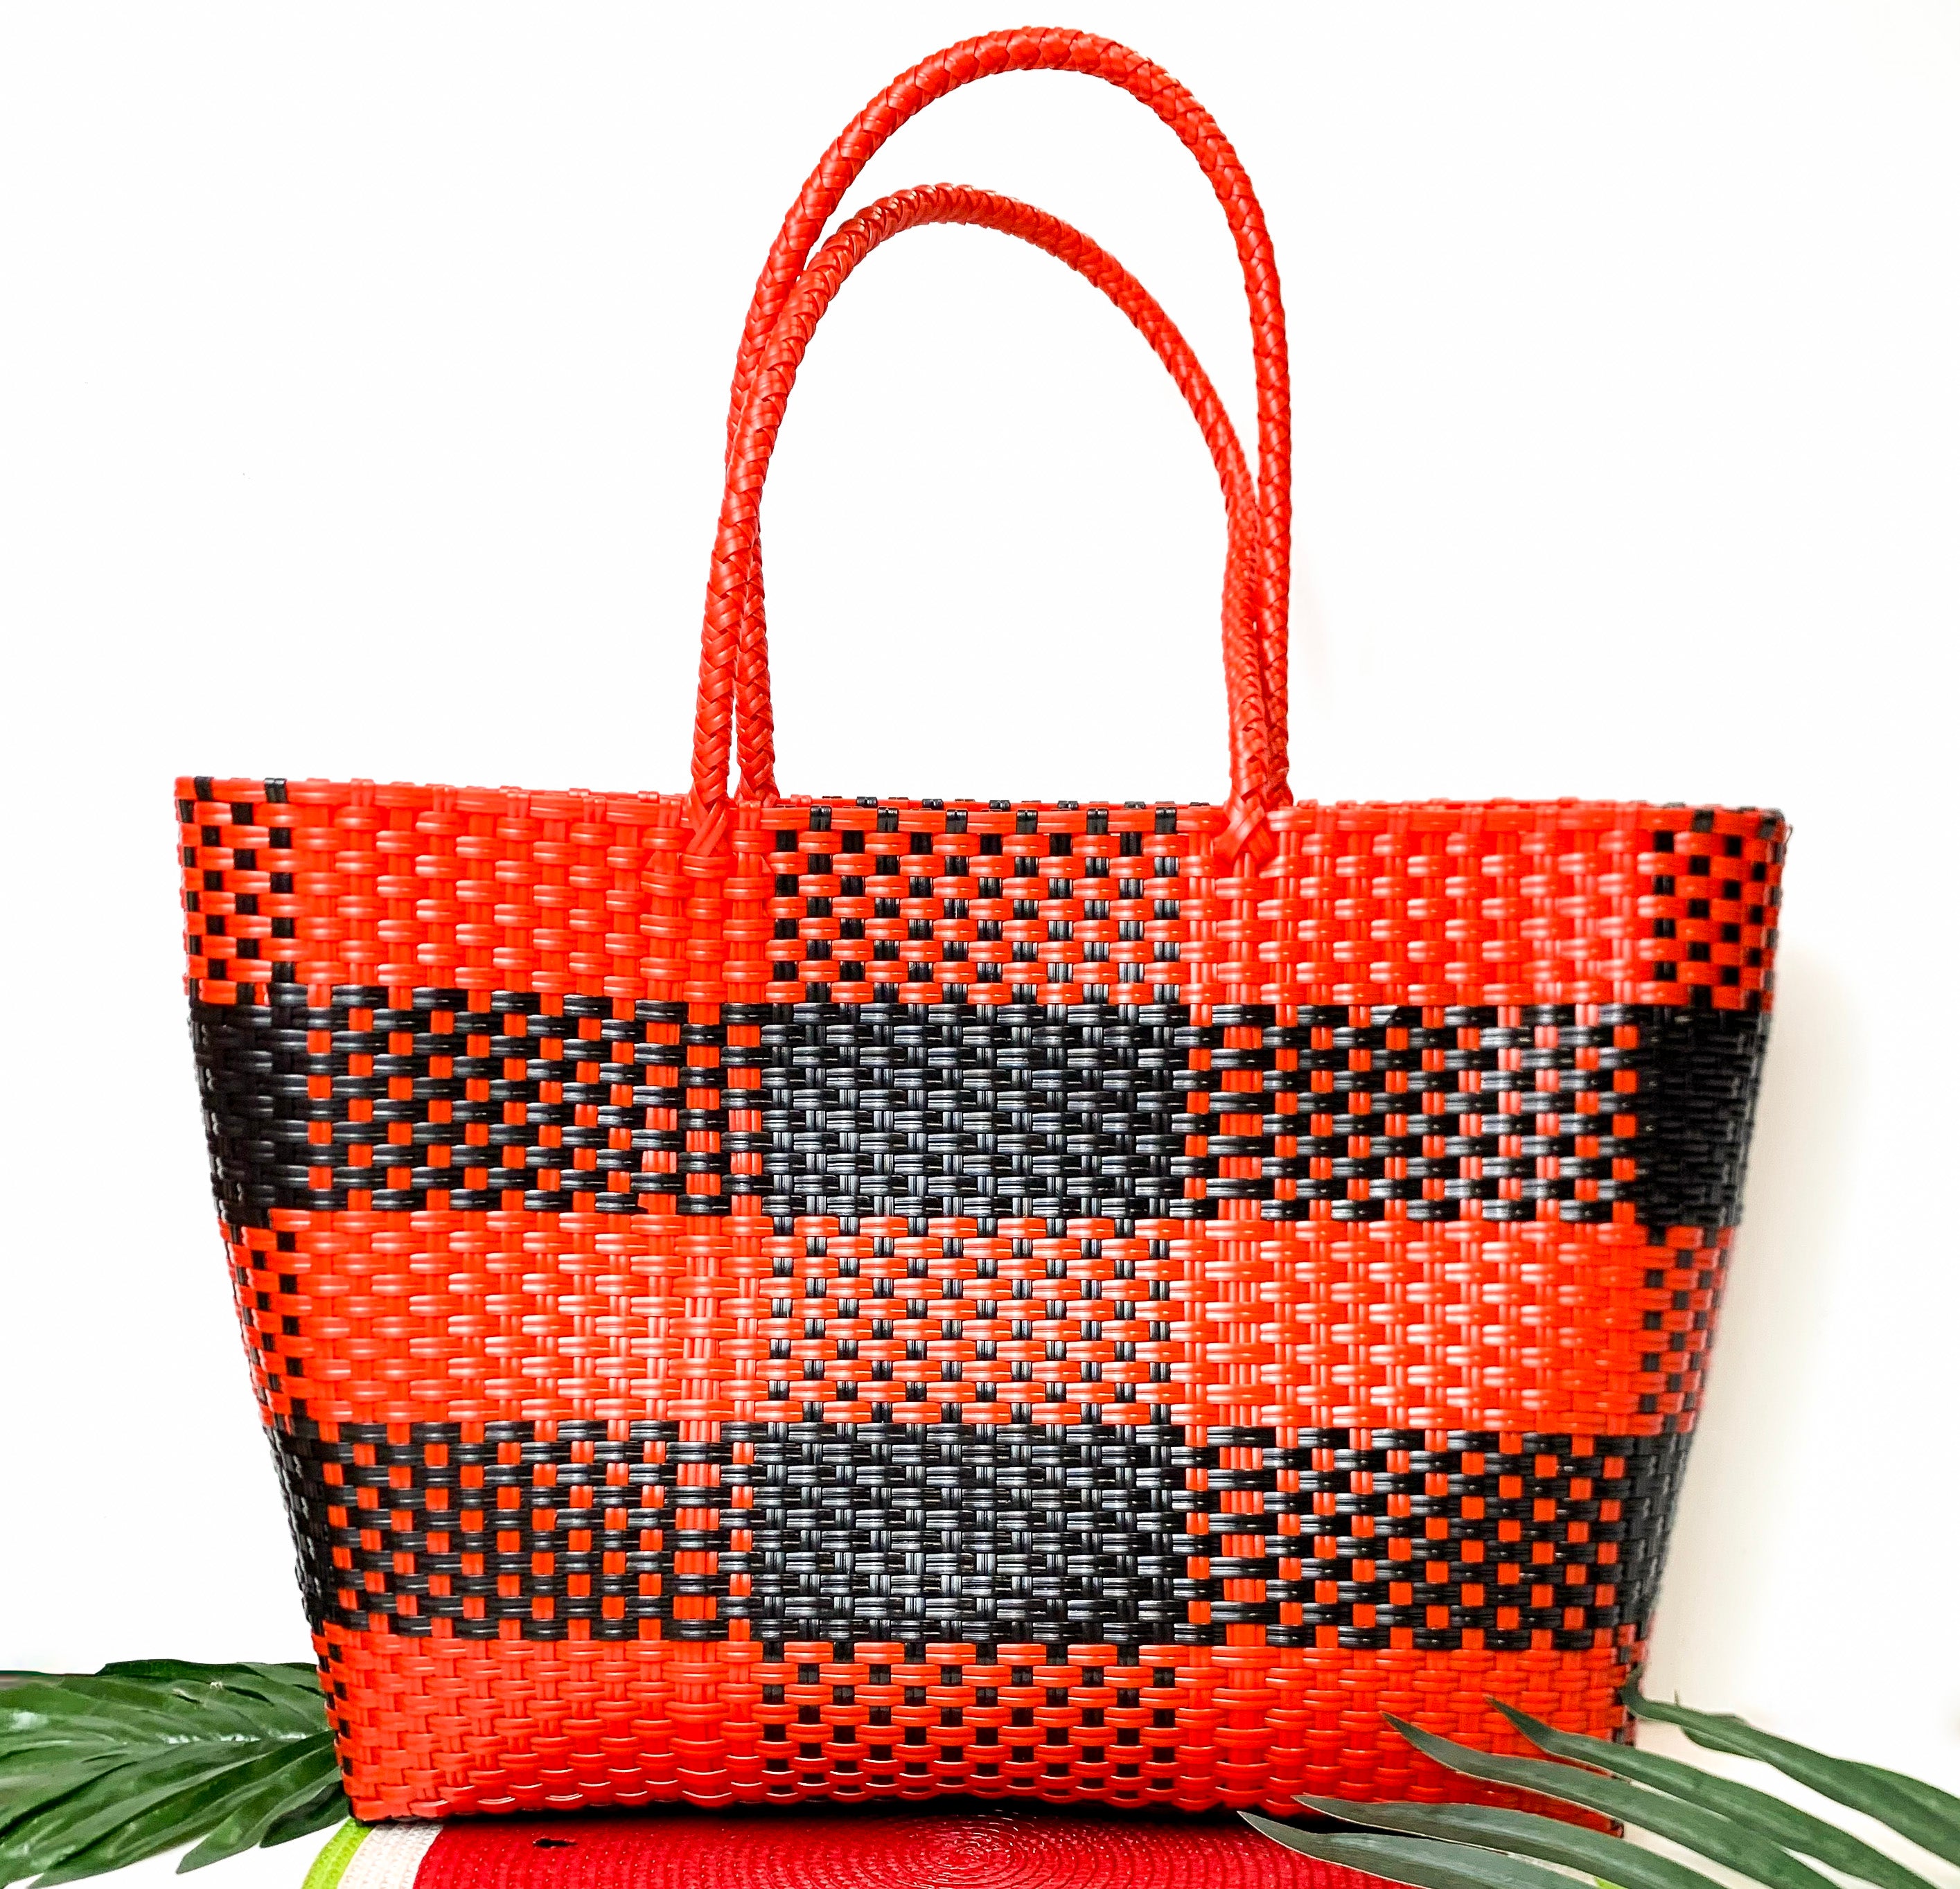 Garden Party Gingham Tote Bag in Red and Black